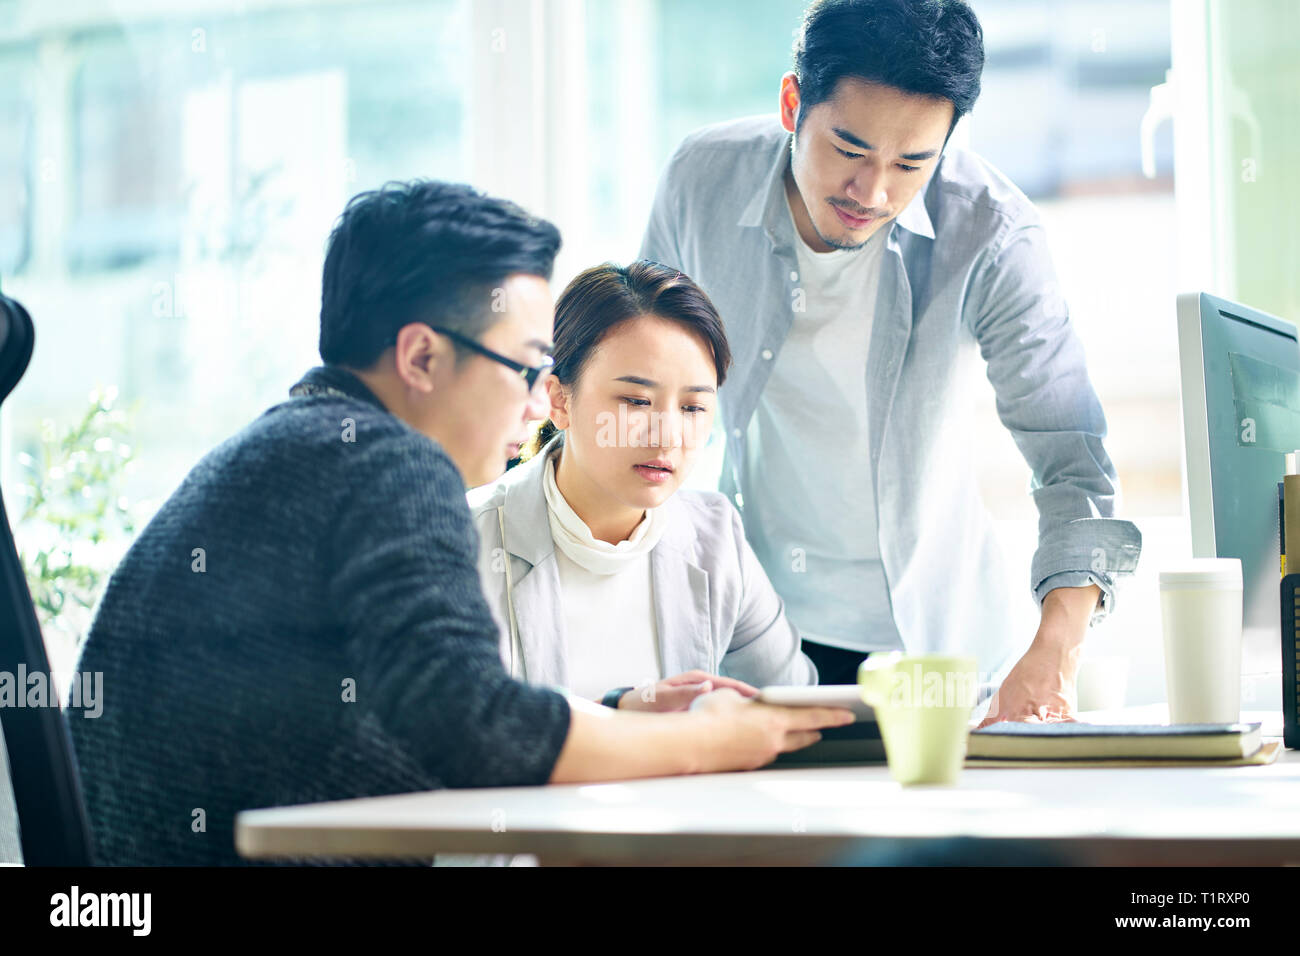 three young asian corporate executives working together discussing business plan in office. Stock Photo